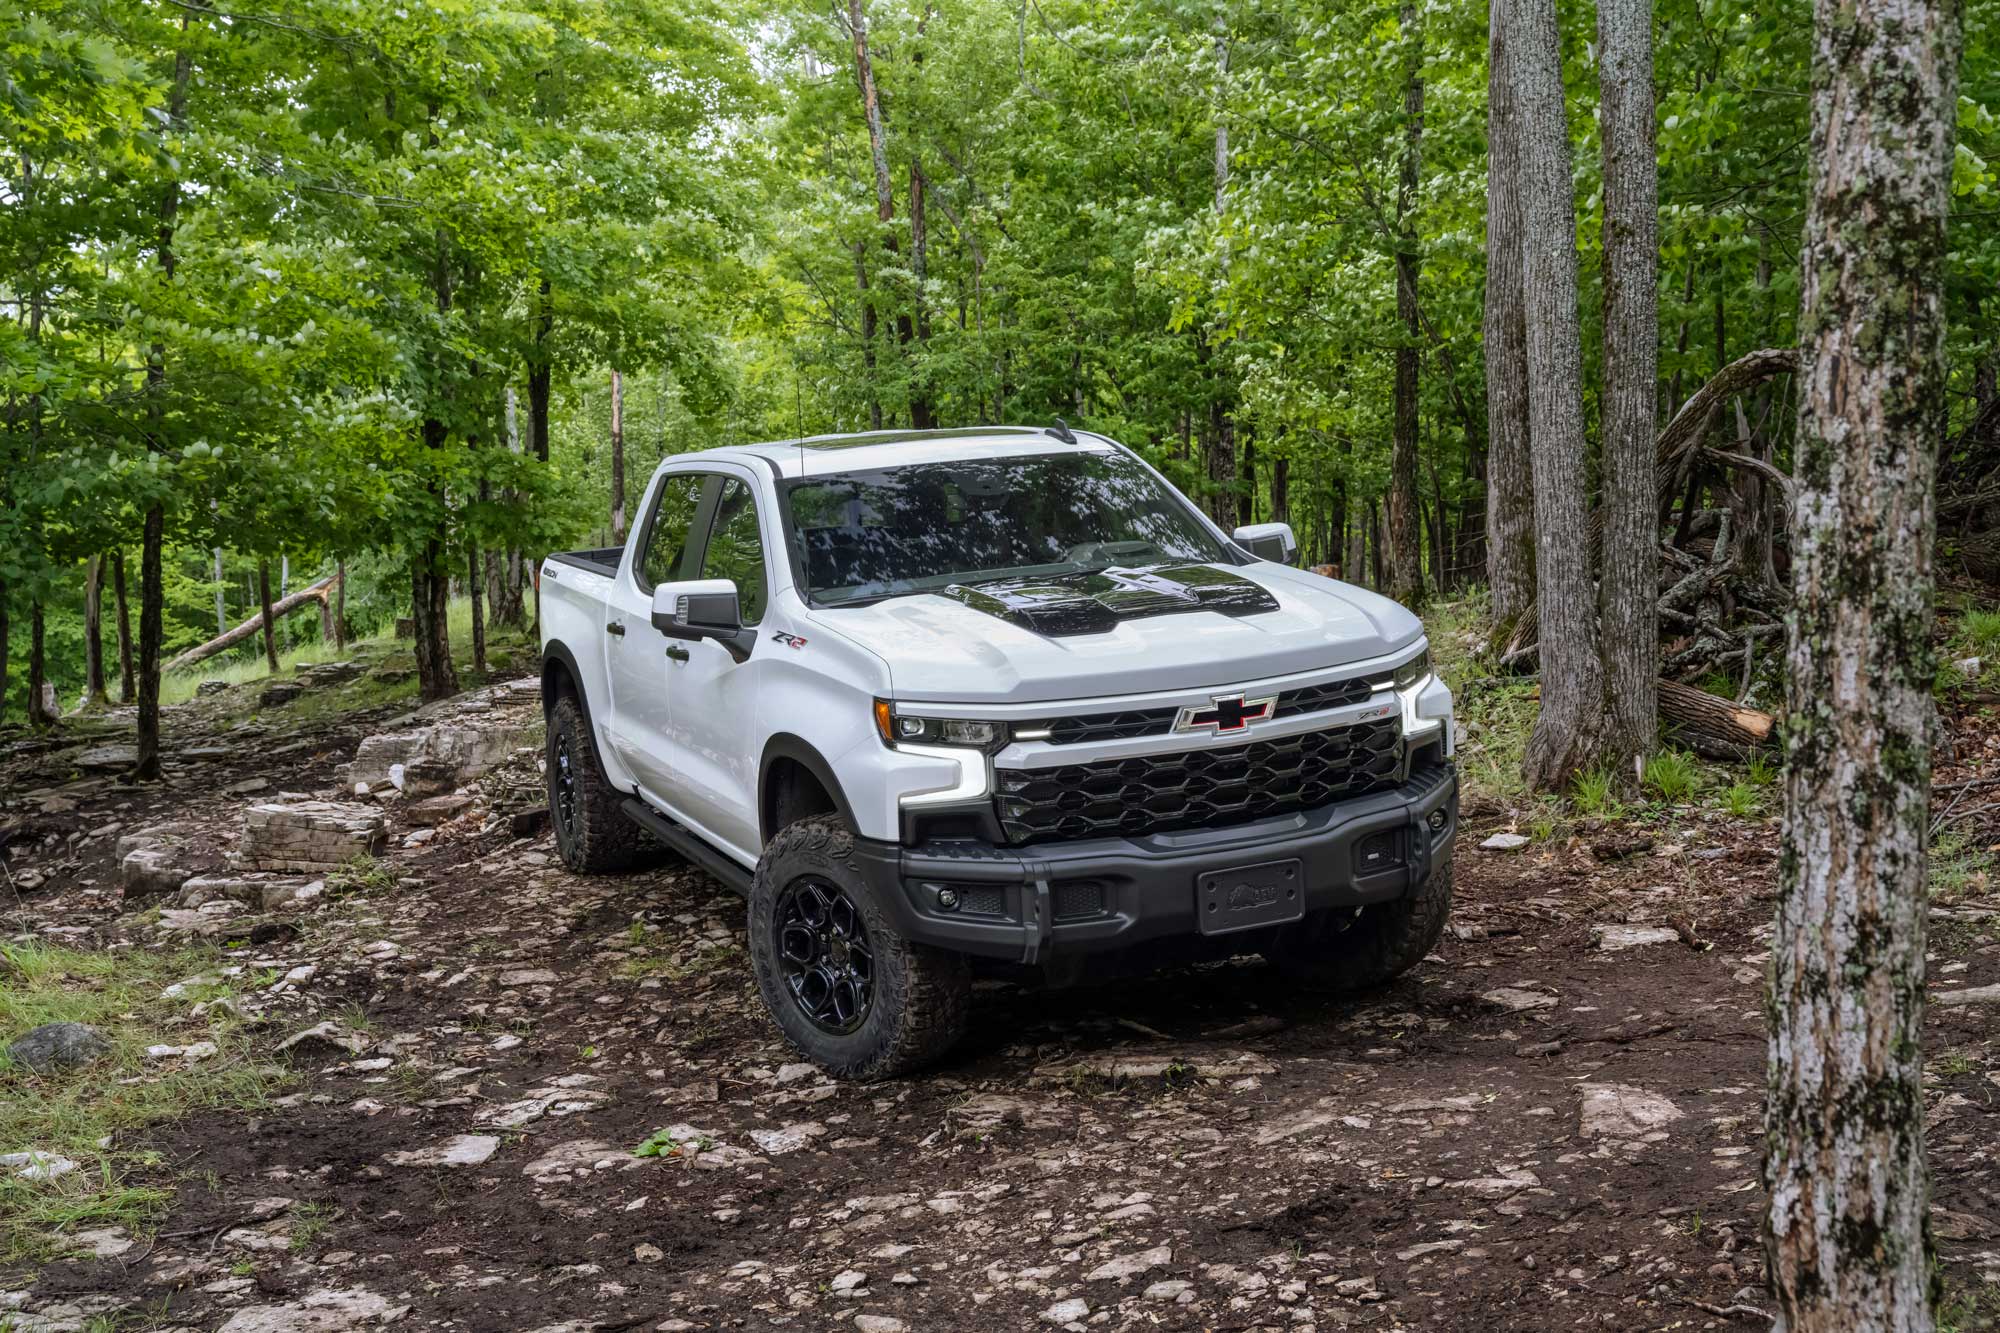 2023 Chevrolet Silverado ZR2 Bison parked off-road in a forest.